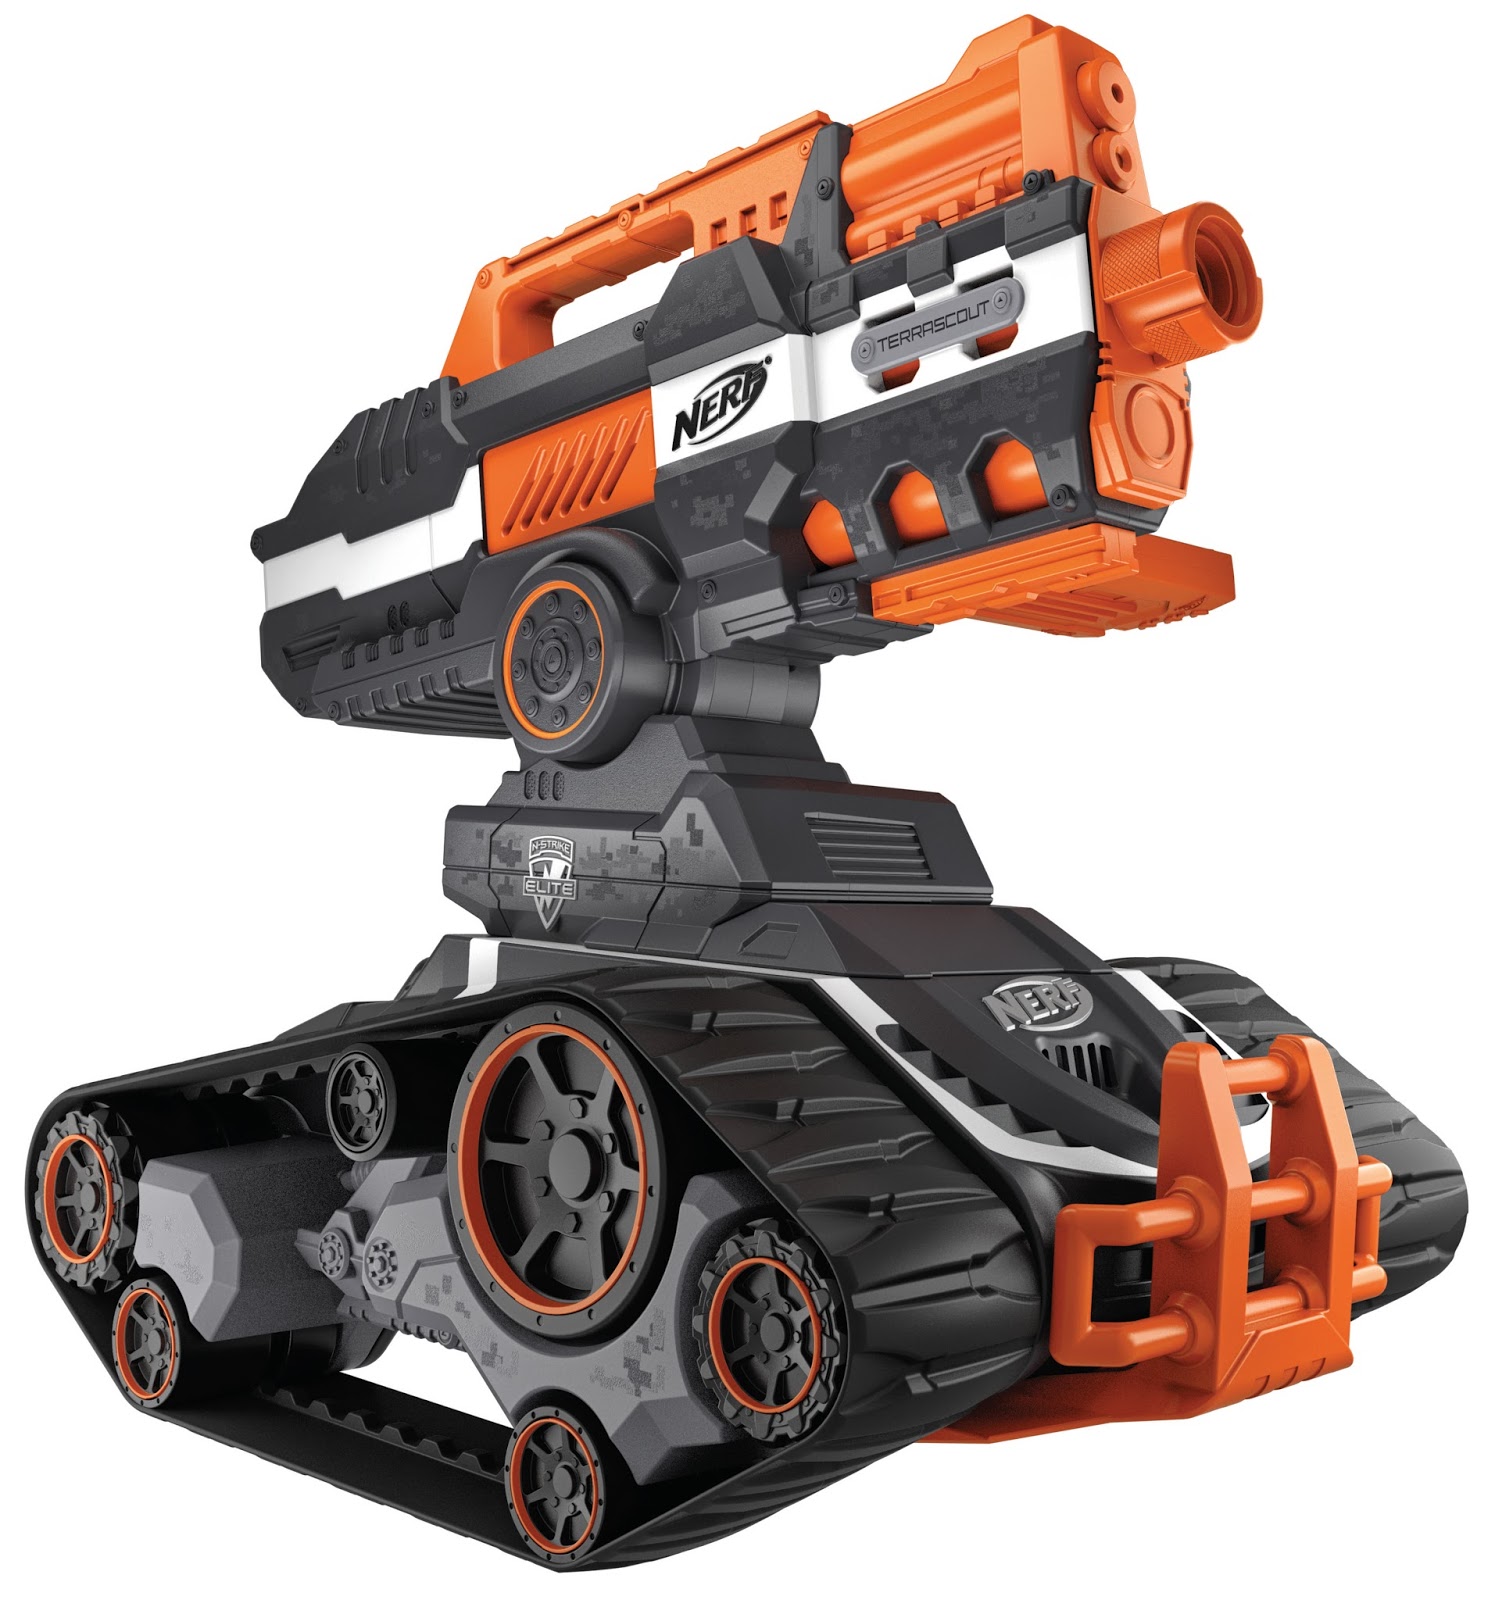 Albums 101+ Images show me a picture of a nerf gun Full HD, 2k, 4k